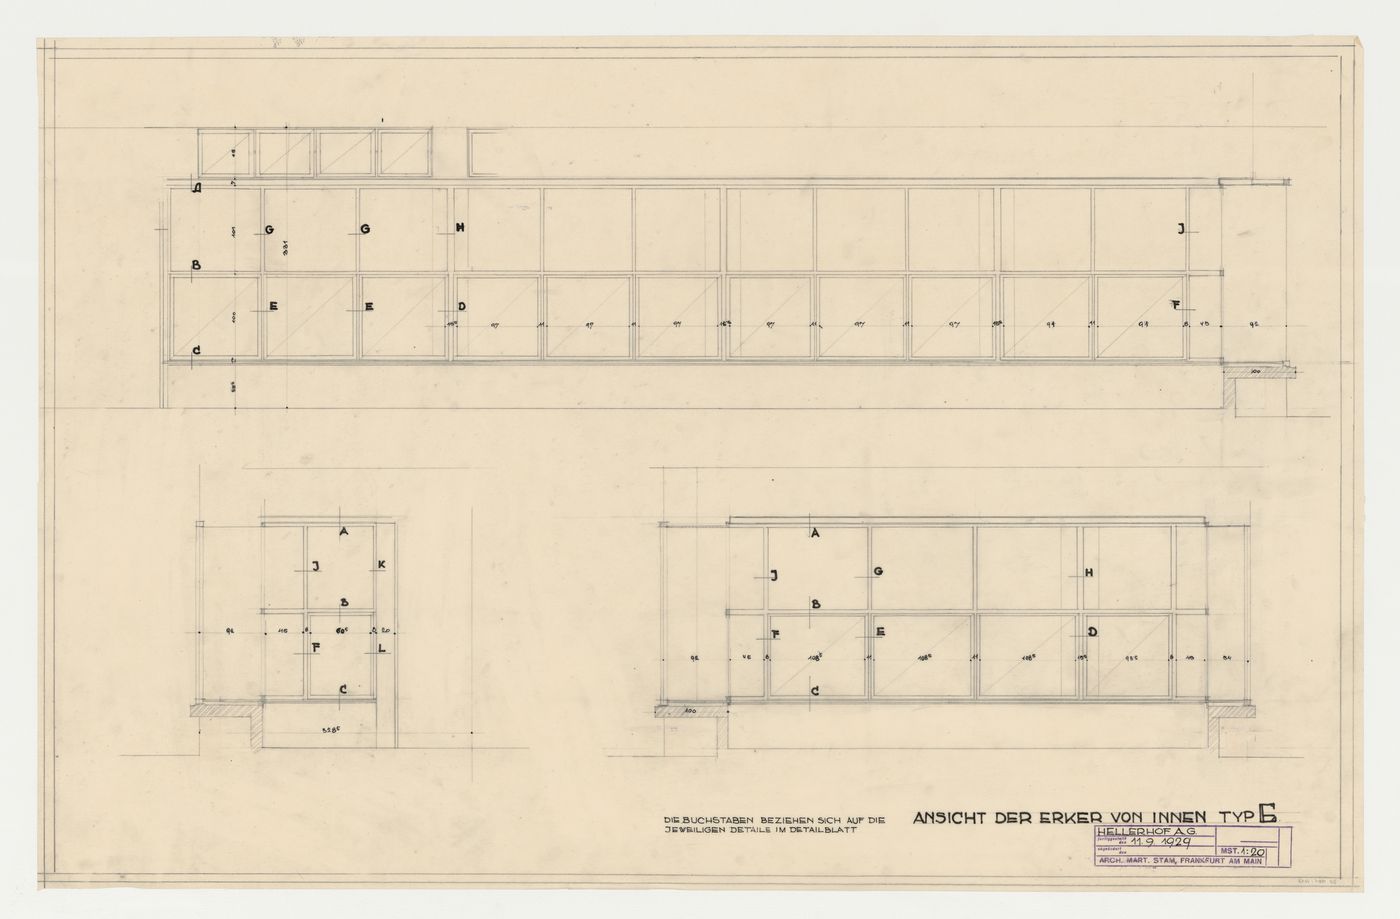 Interior elevations for a type E alcove, Hellerhof Housing Estate, Frankfurt am Main, Germany